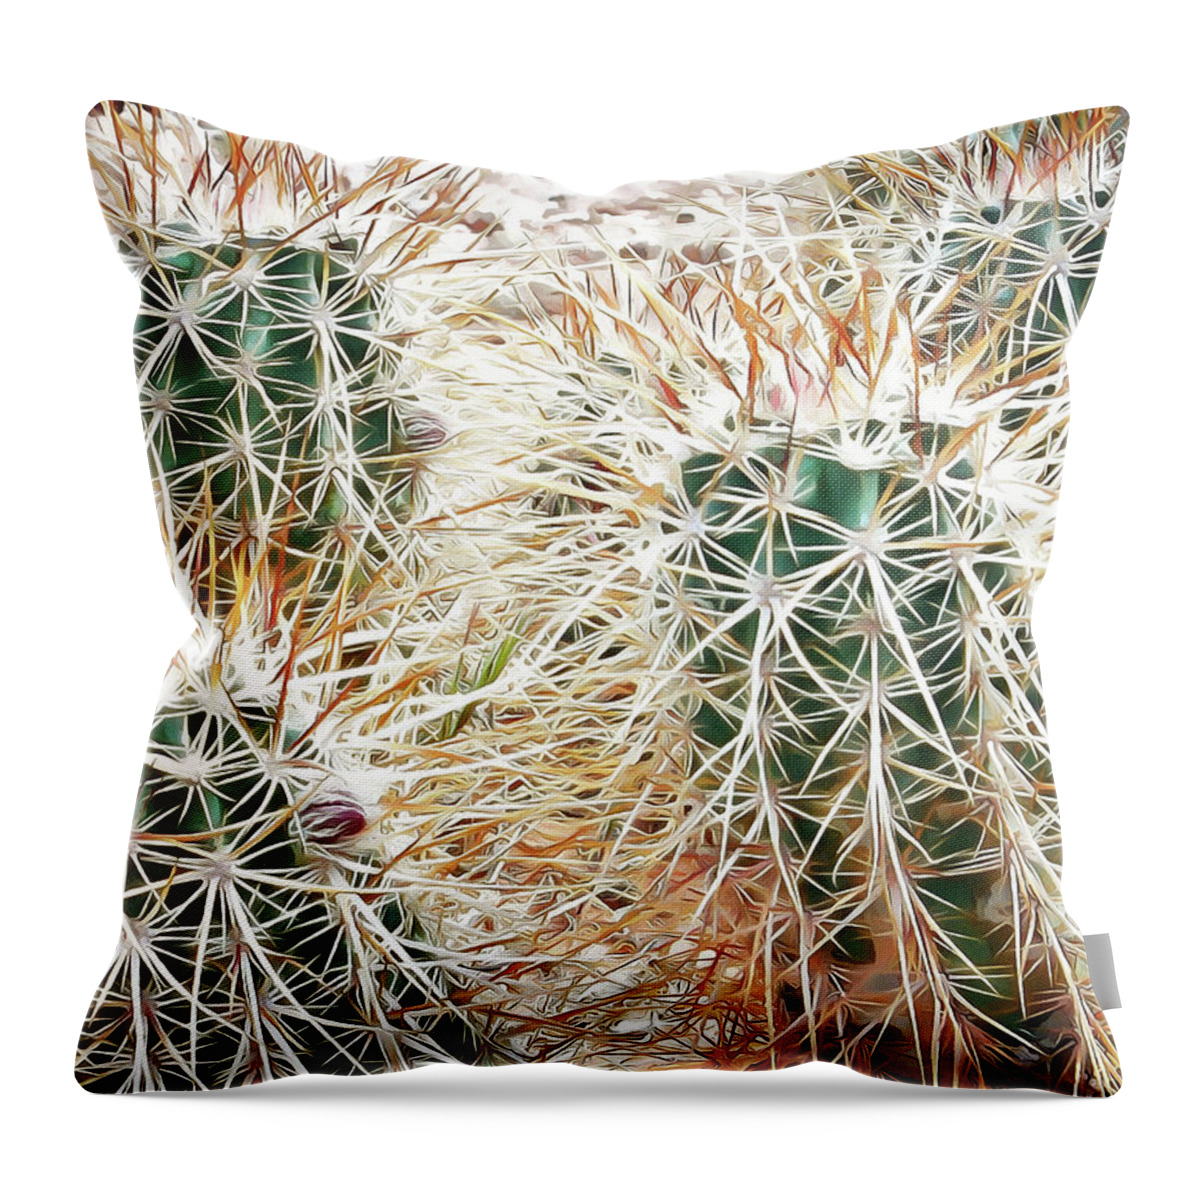 Cactus Throw Pillow featuring the digital art Prickly Protection by Leslie Montgomery